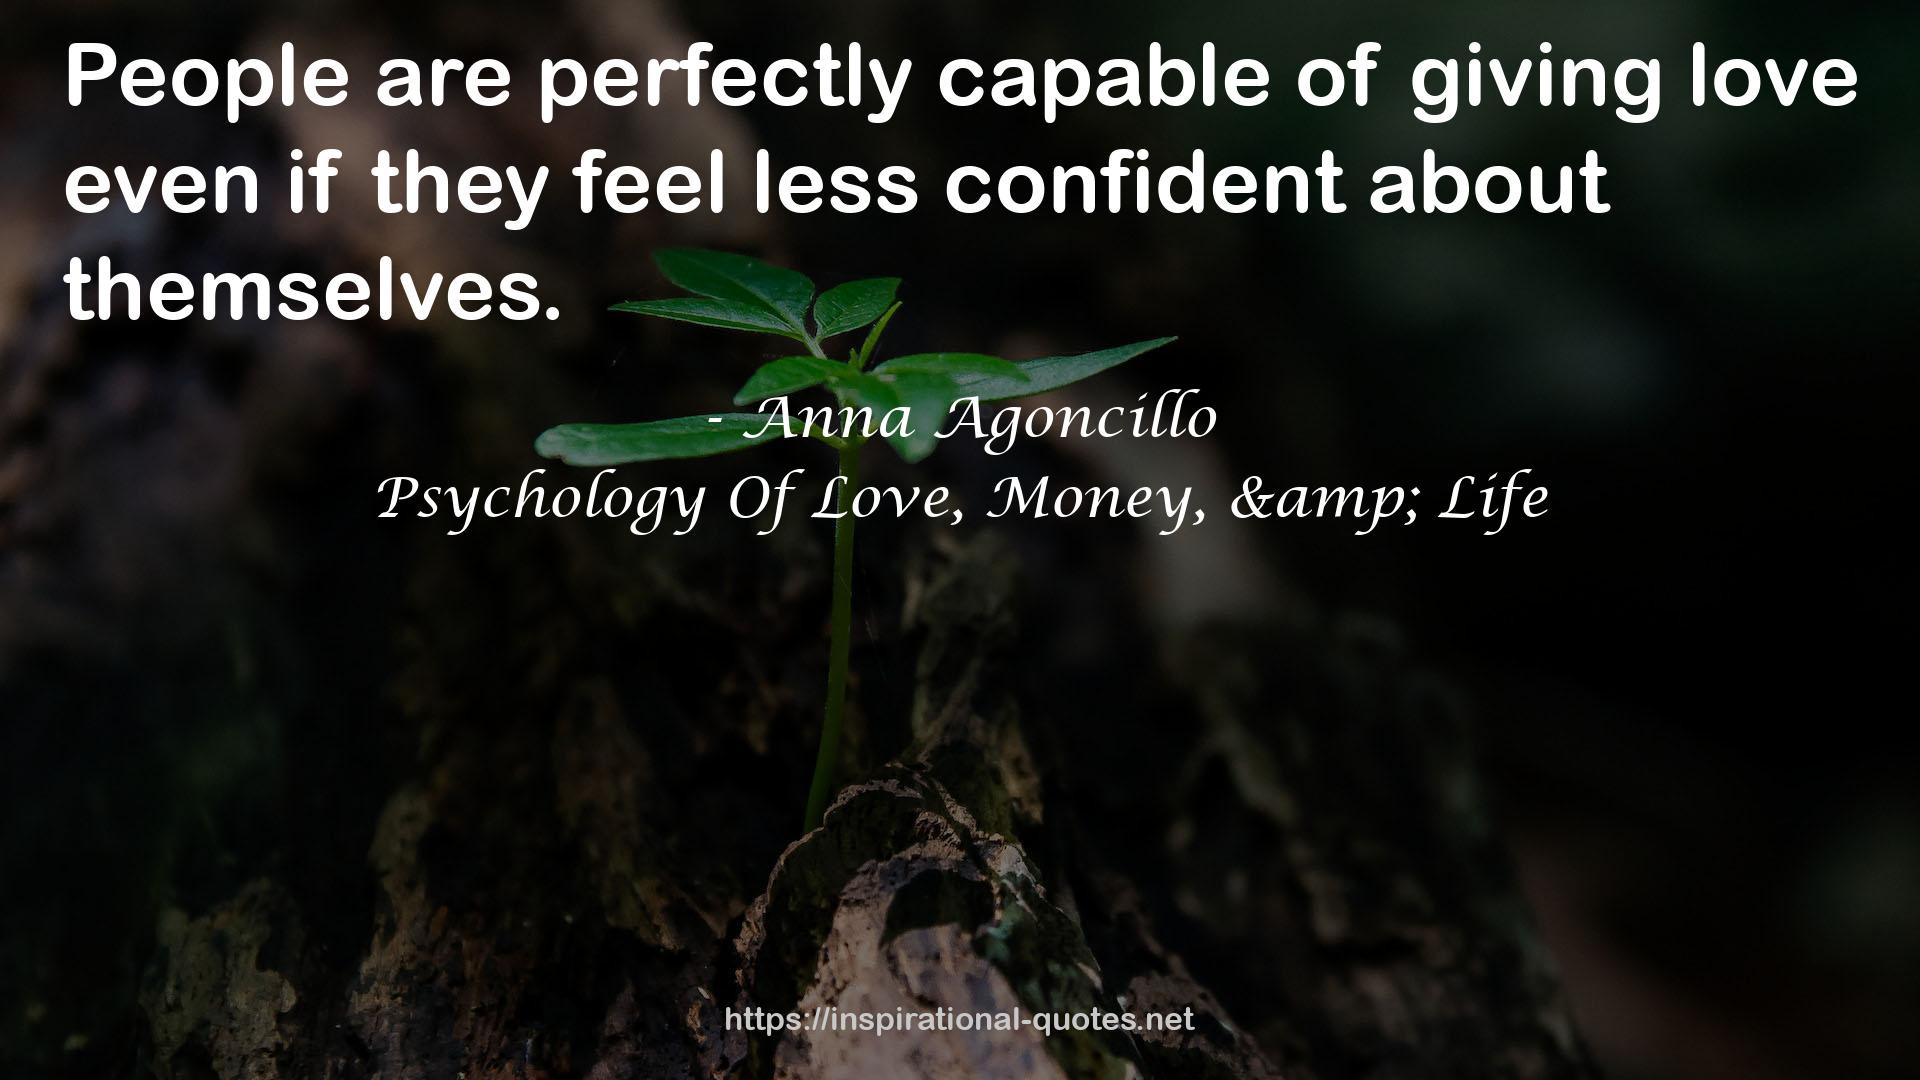 Psychology Of Love, Money, & Life QUOTES